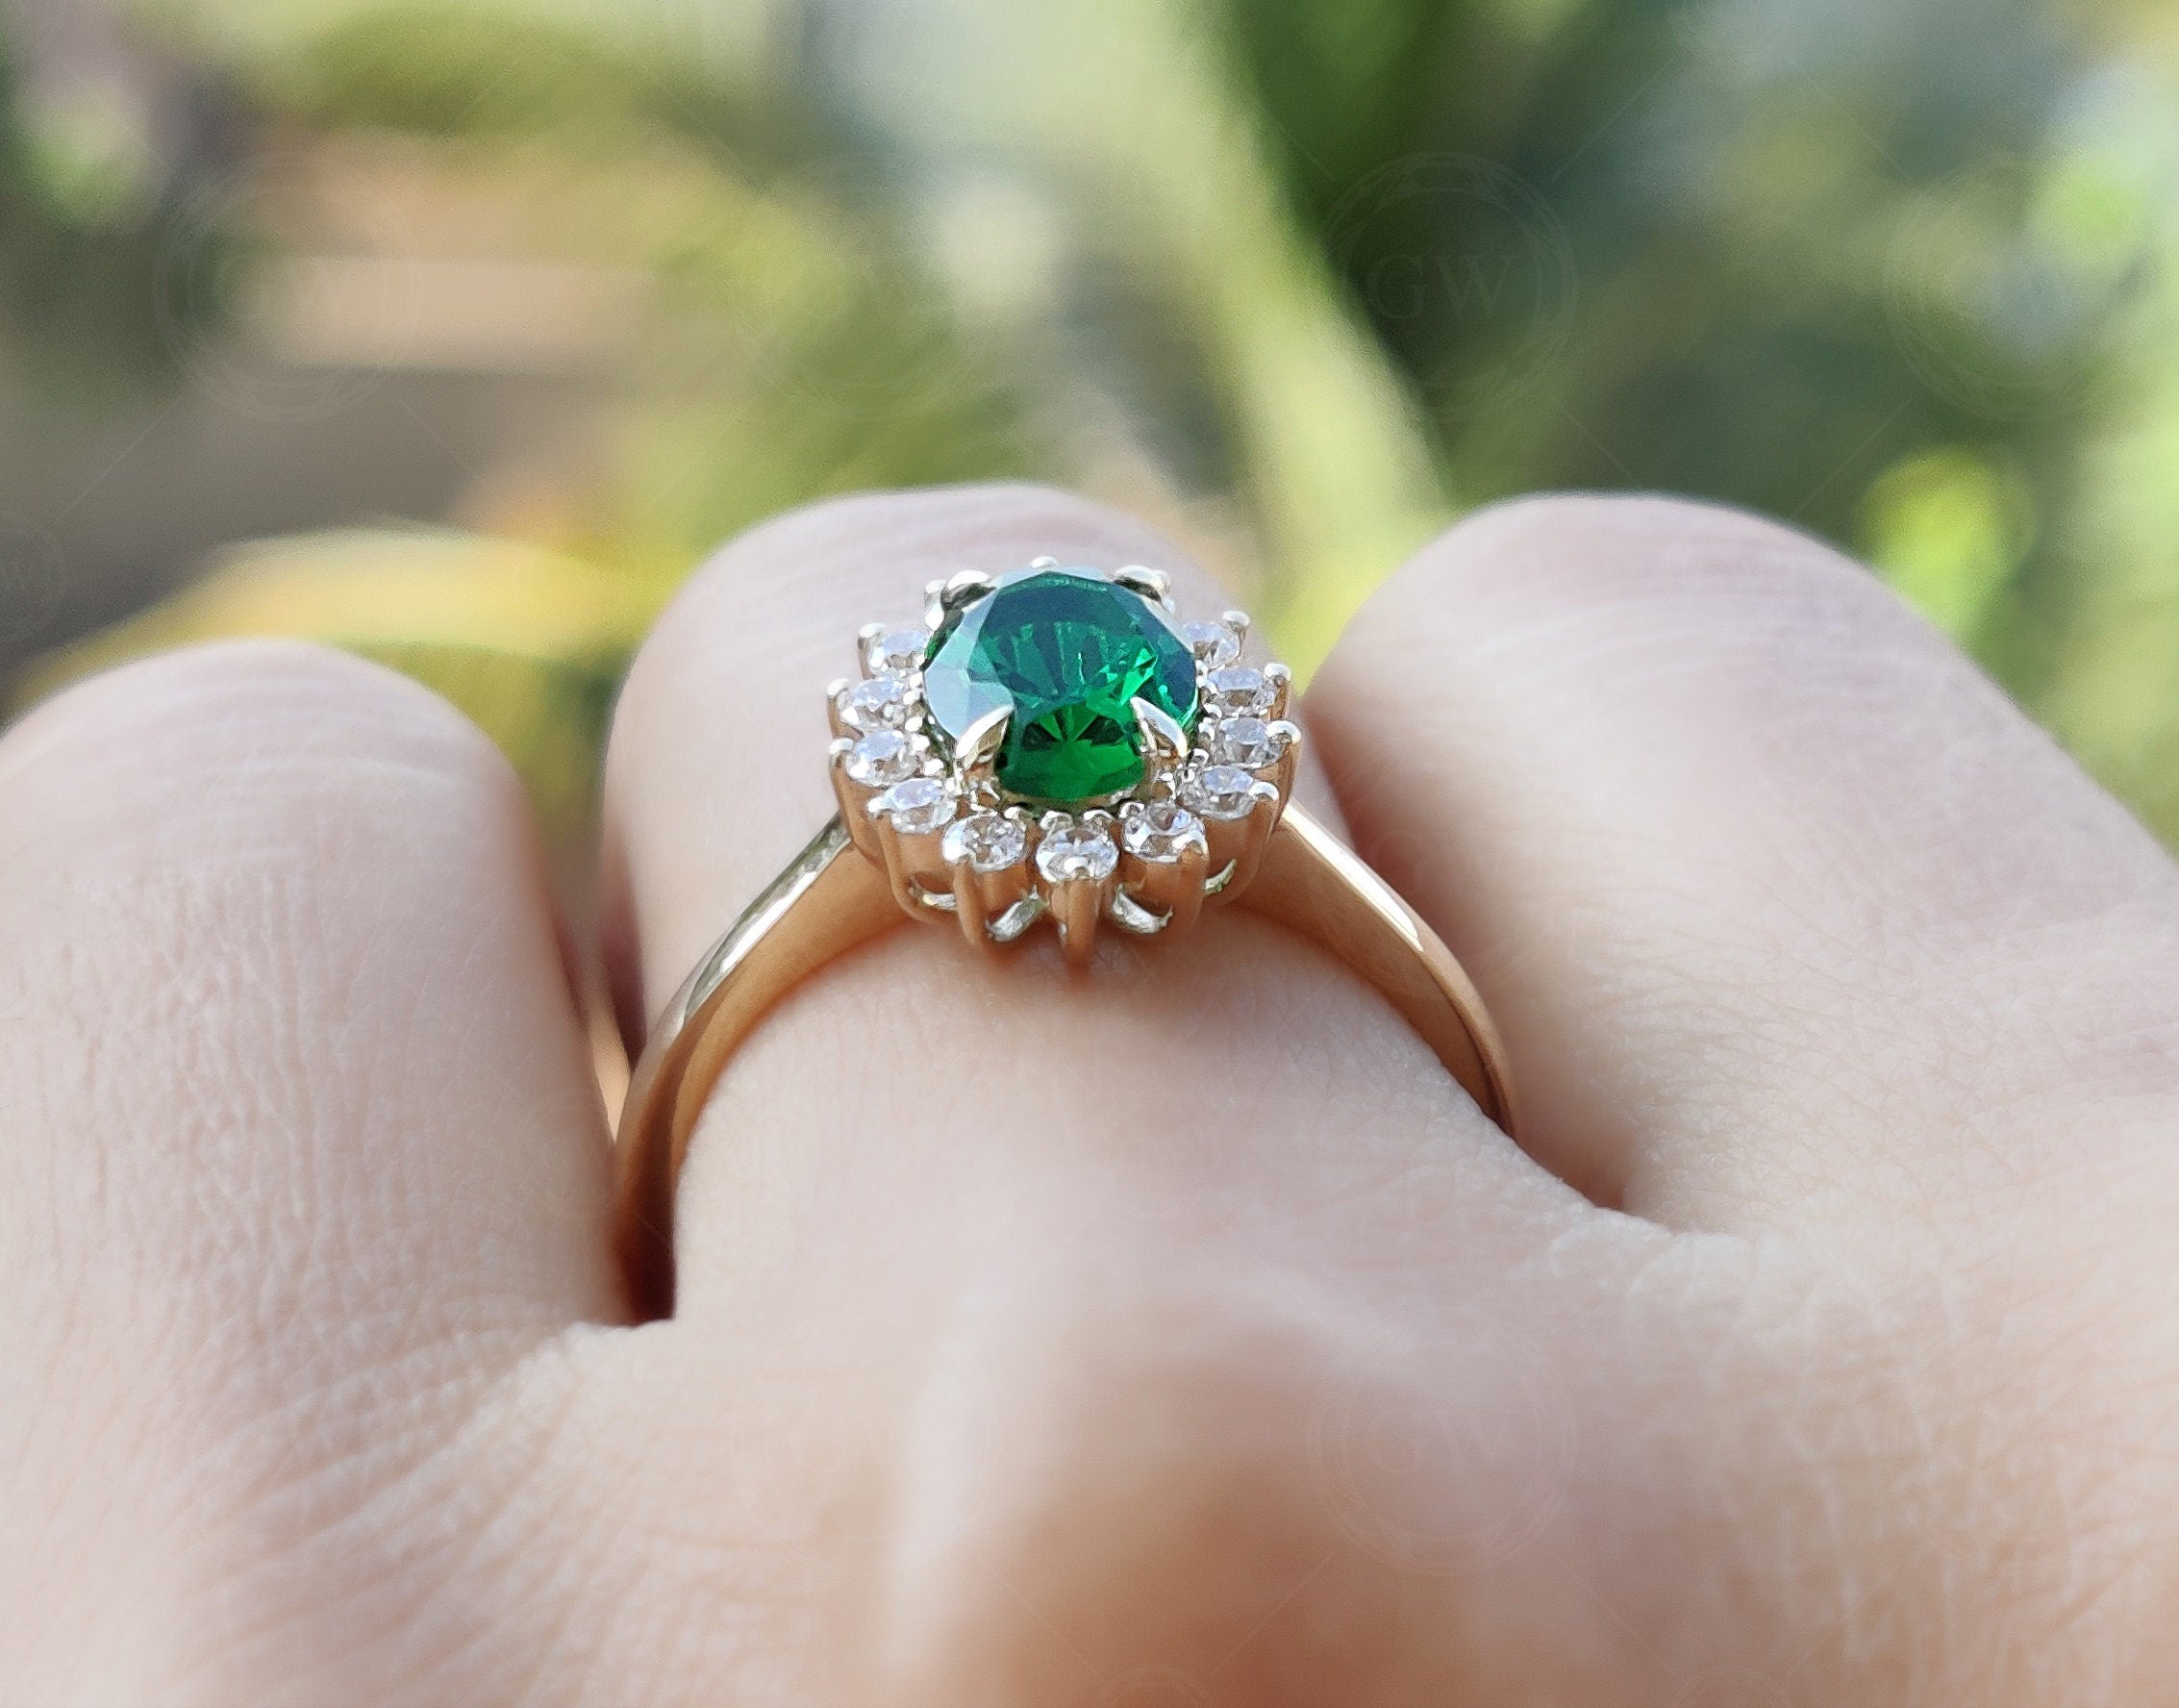 Emerald Halo Engagement Ring, Green Gemstone Rings For Women, May Birthstone Ring, Oval Emerald Halo Ring Gold Anniversary Ring Promise Ring